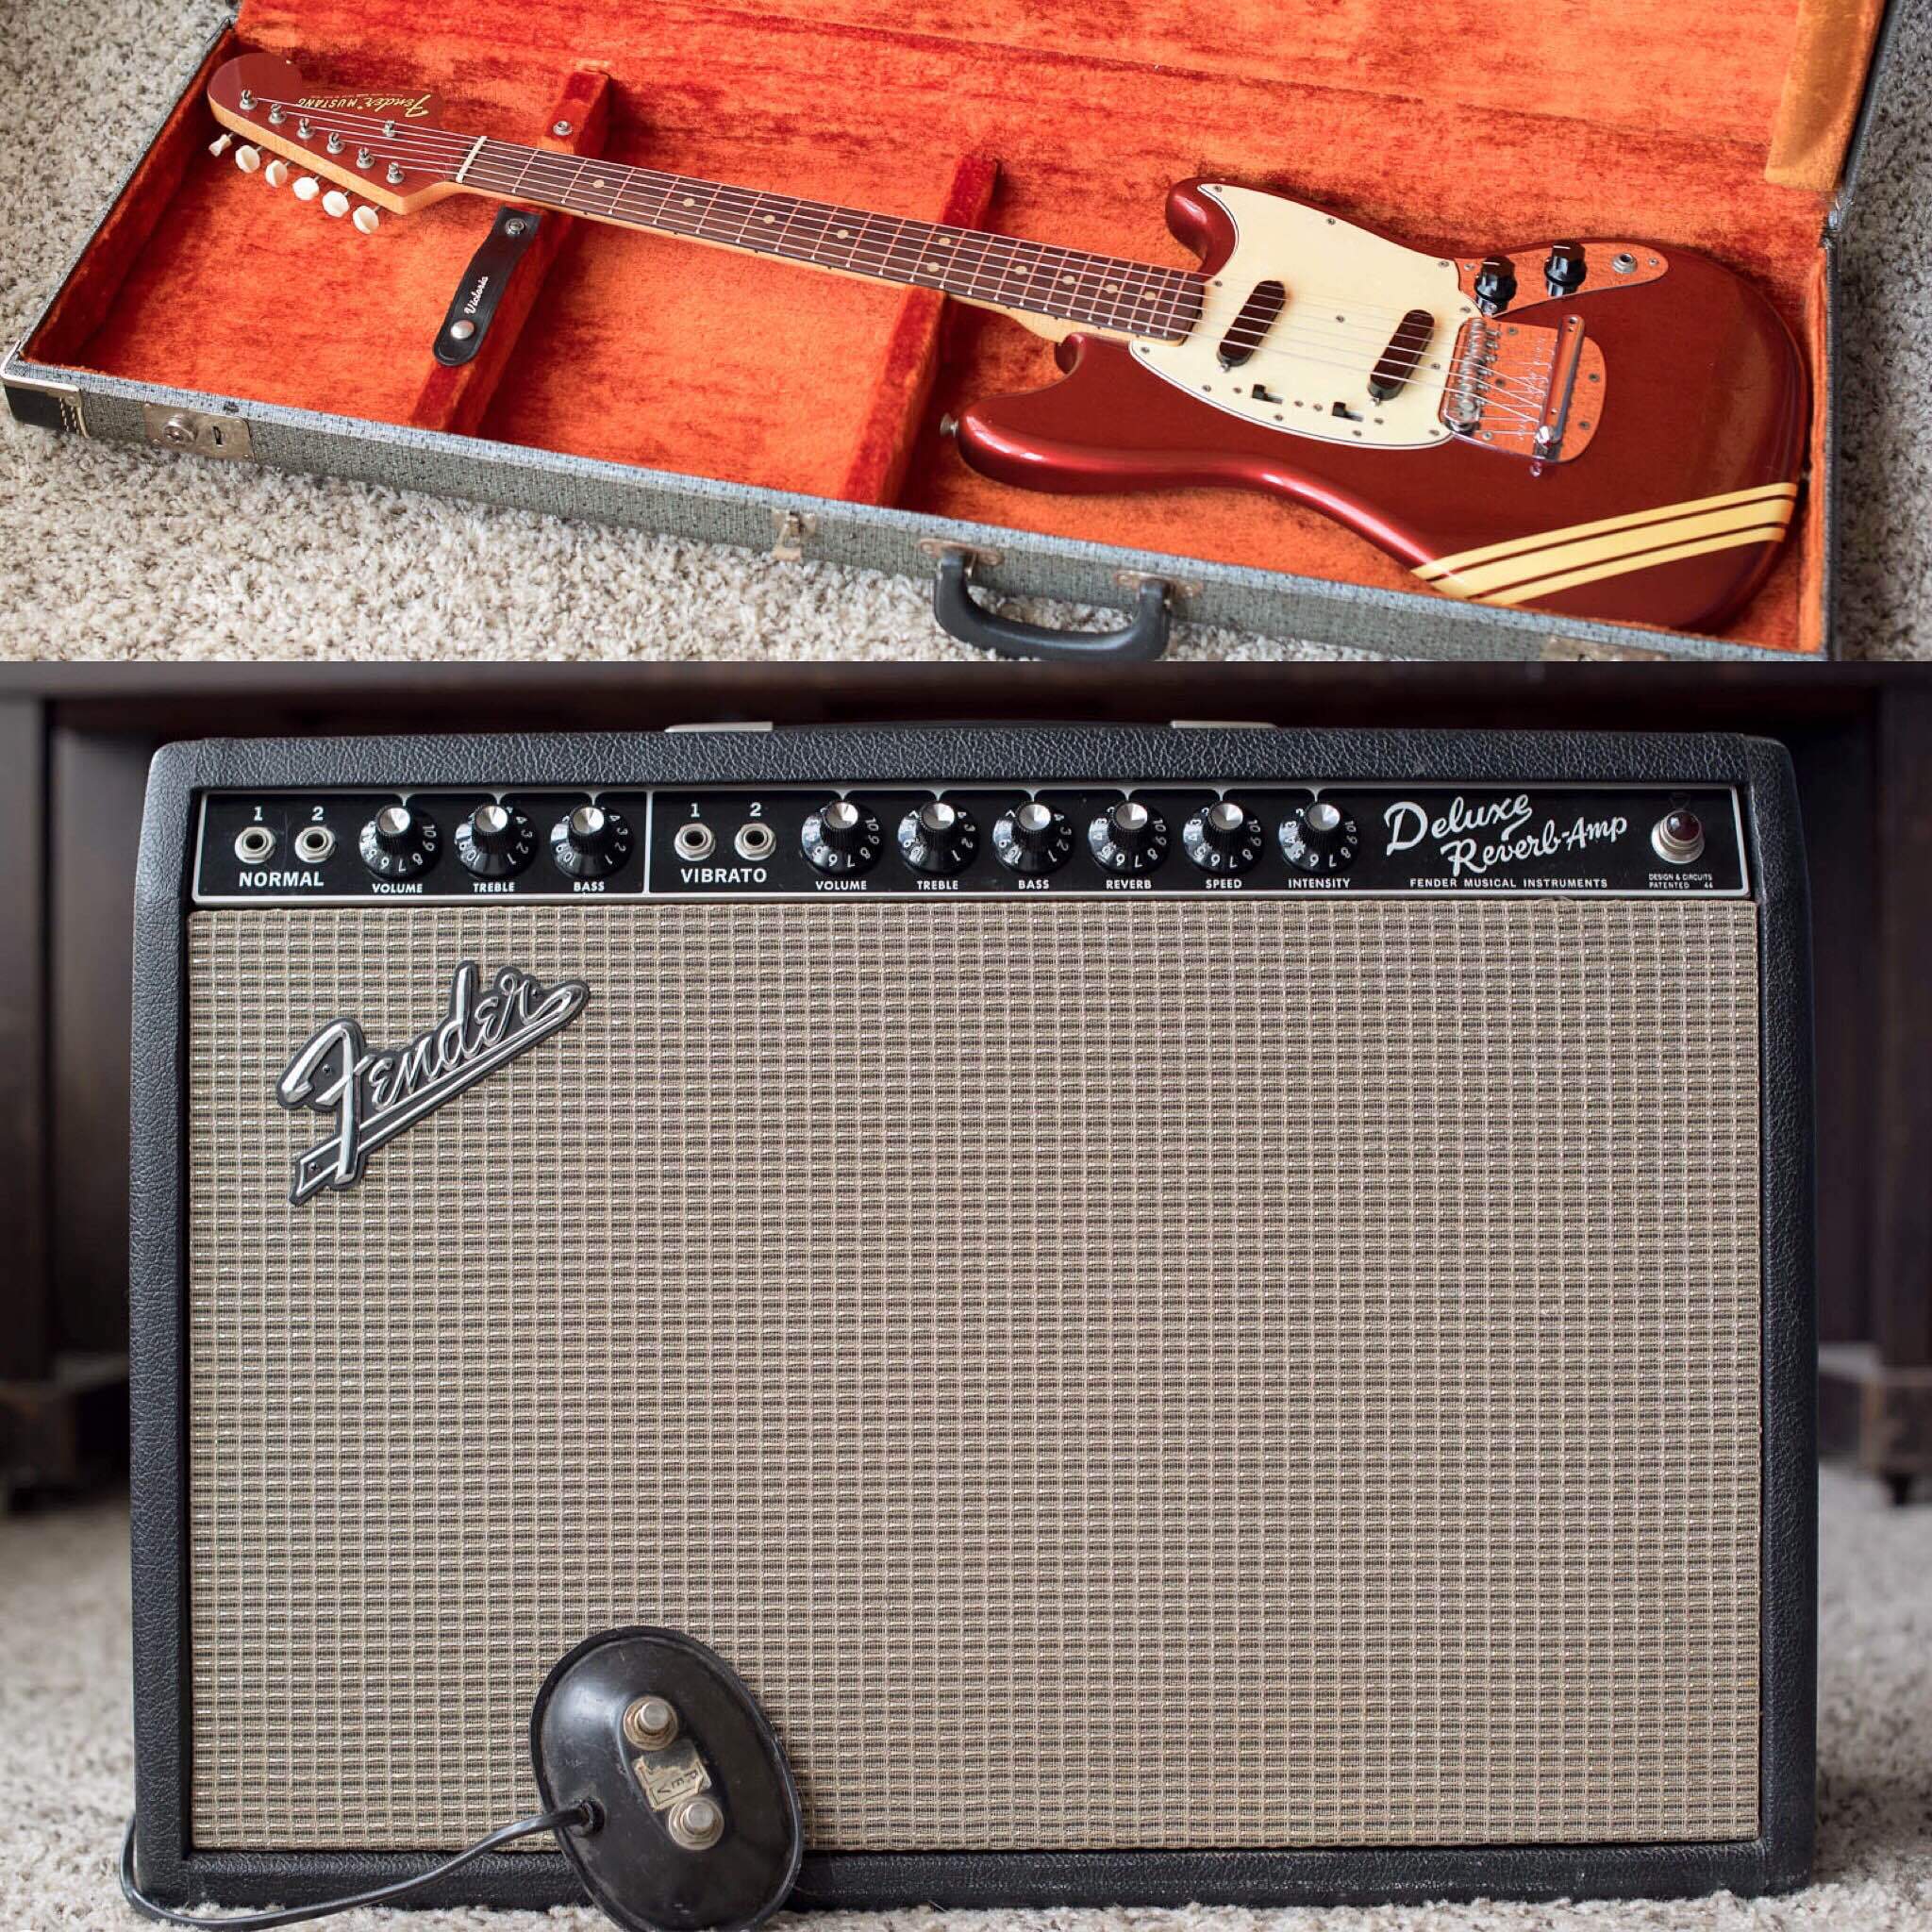 Vintage Guitar and Amp Recently sold